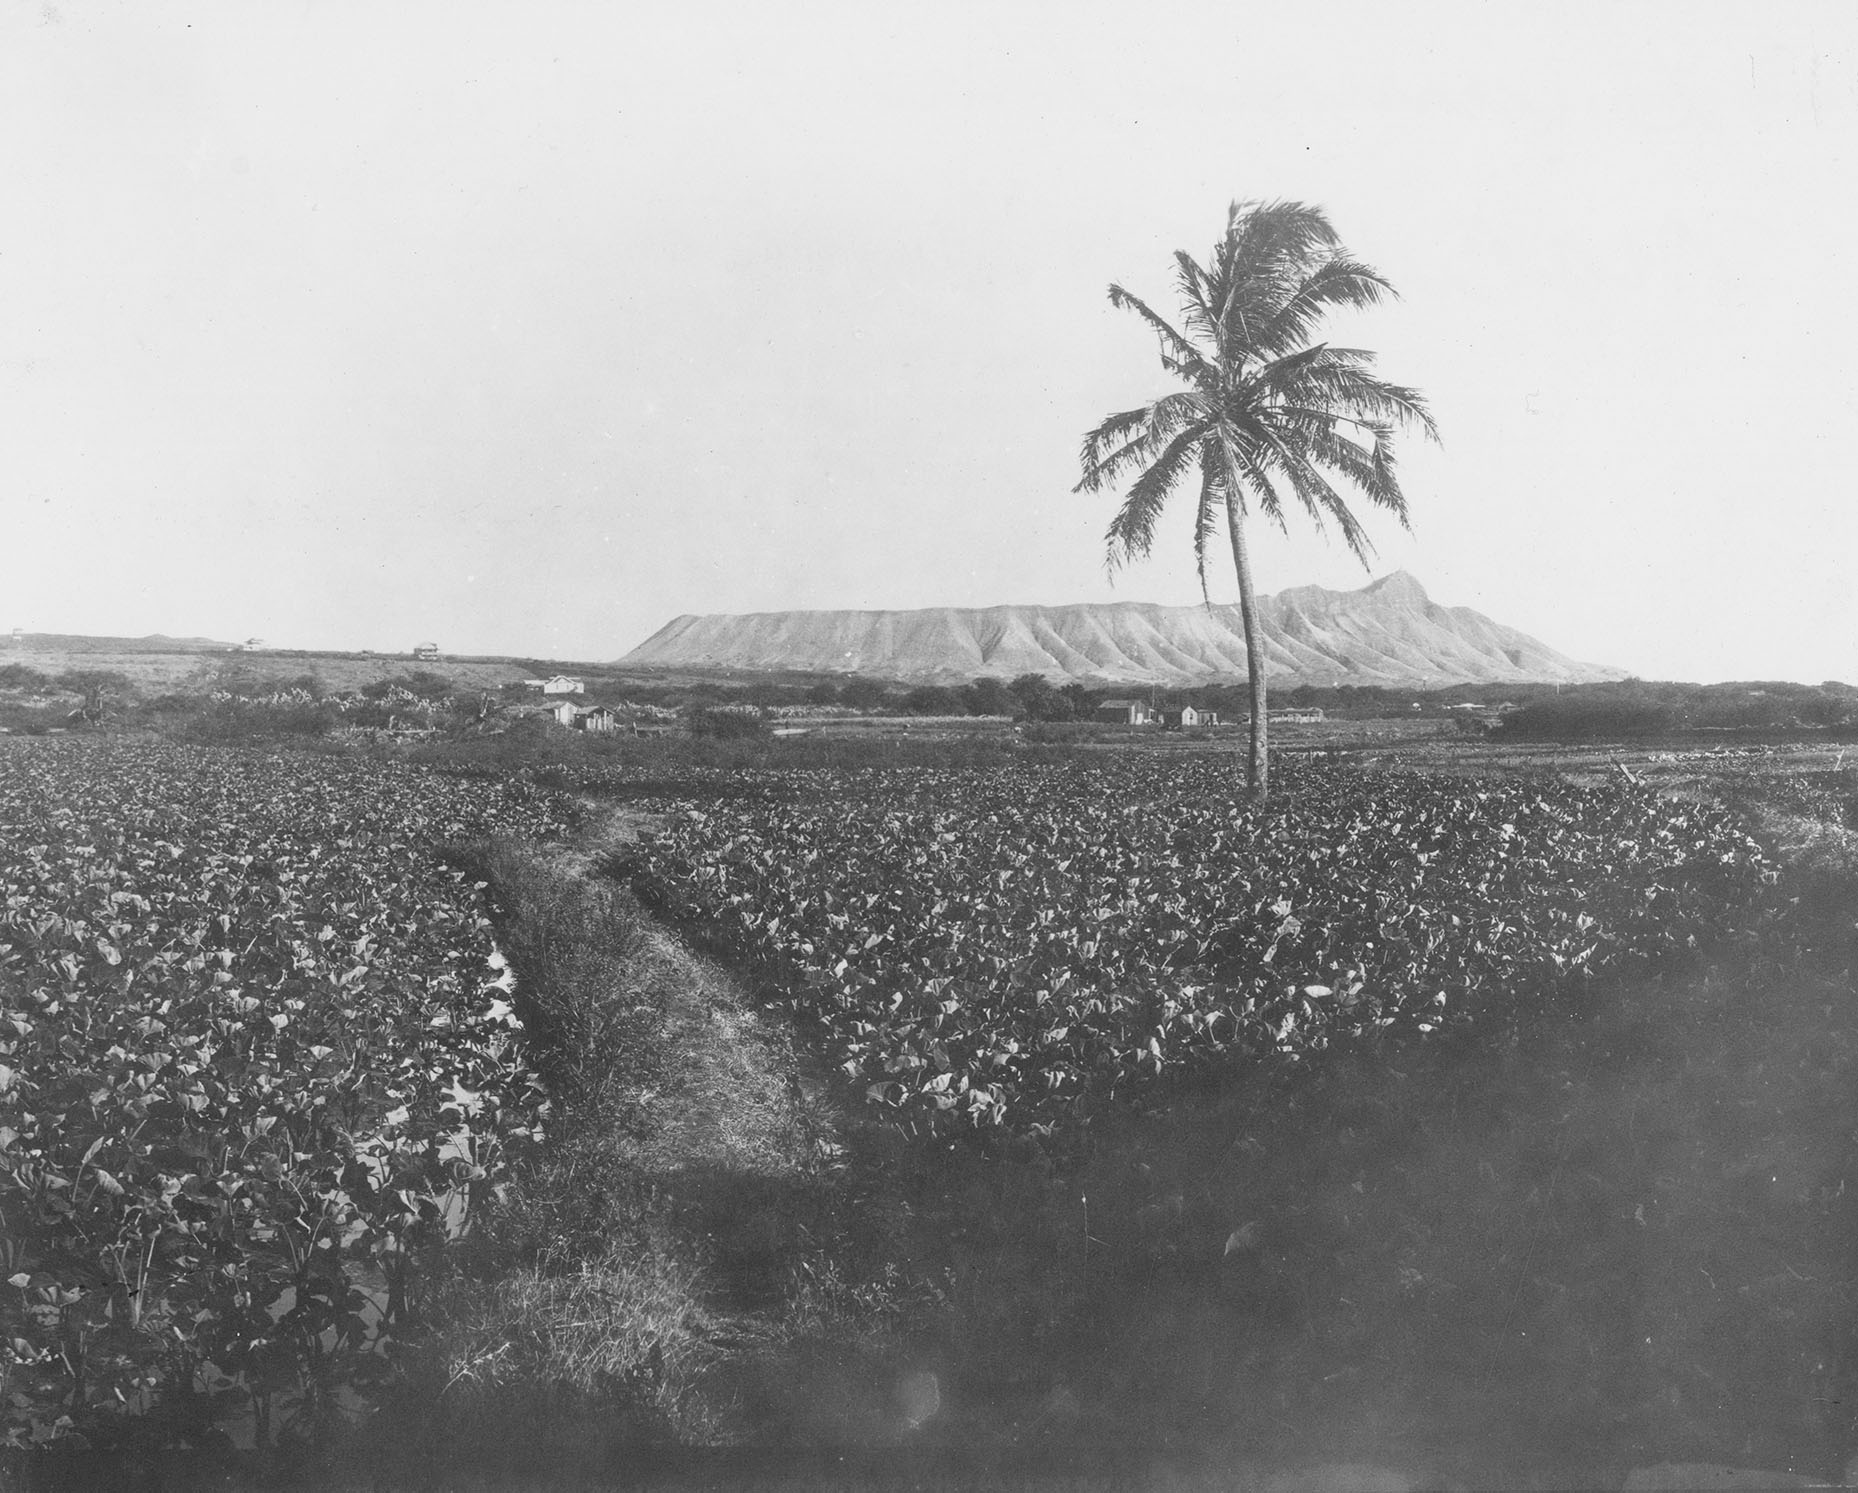 [Duck ponds in Honolulu] View of Diamond Head from the duck ponds in Honolulu, with taro fields in the foreground; Honolulu, Hawaiʻi, 1910. Photographer unknown, Bishop Museum Archives. Used with permission.